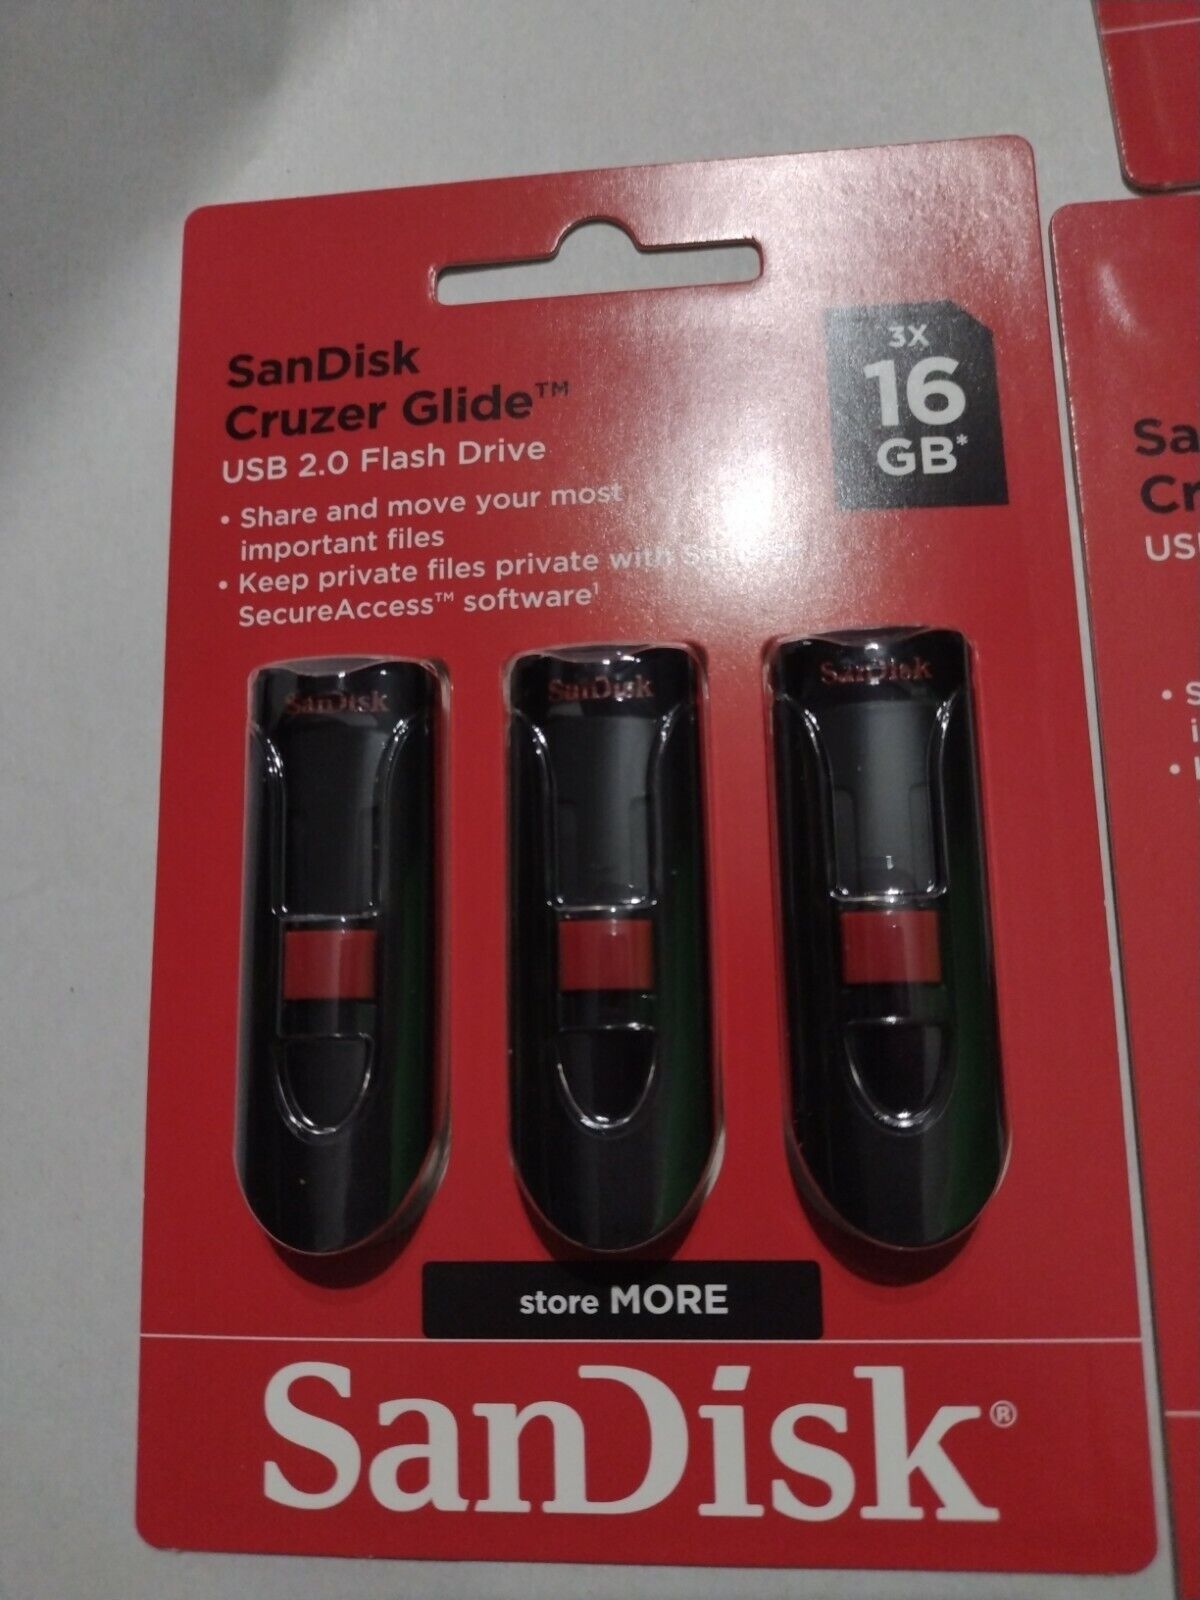 SanDisk 16GB Cruzer Glide USB 2.0 Flash Drive, 3 Pack - SDCZ60-016G-AW46T NEW